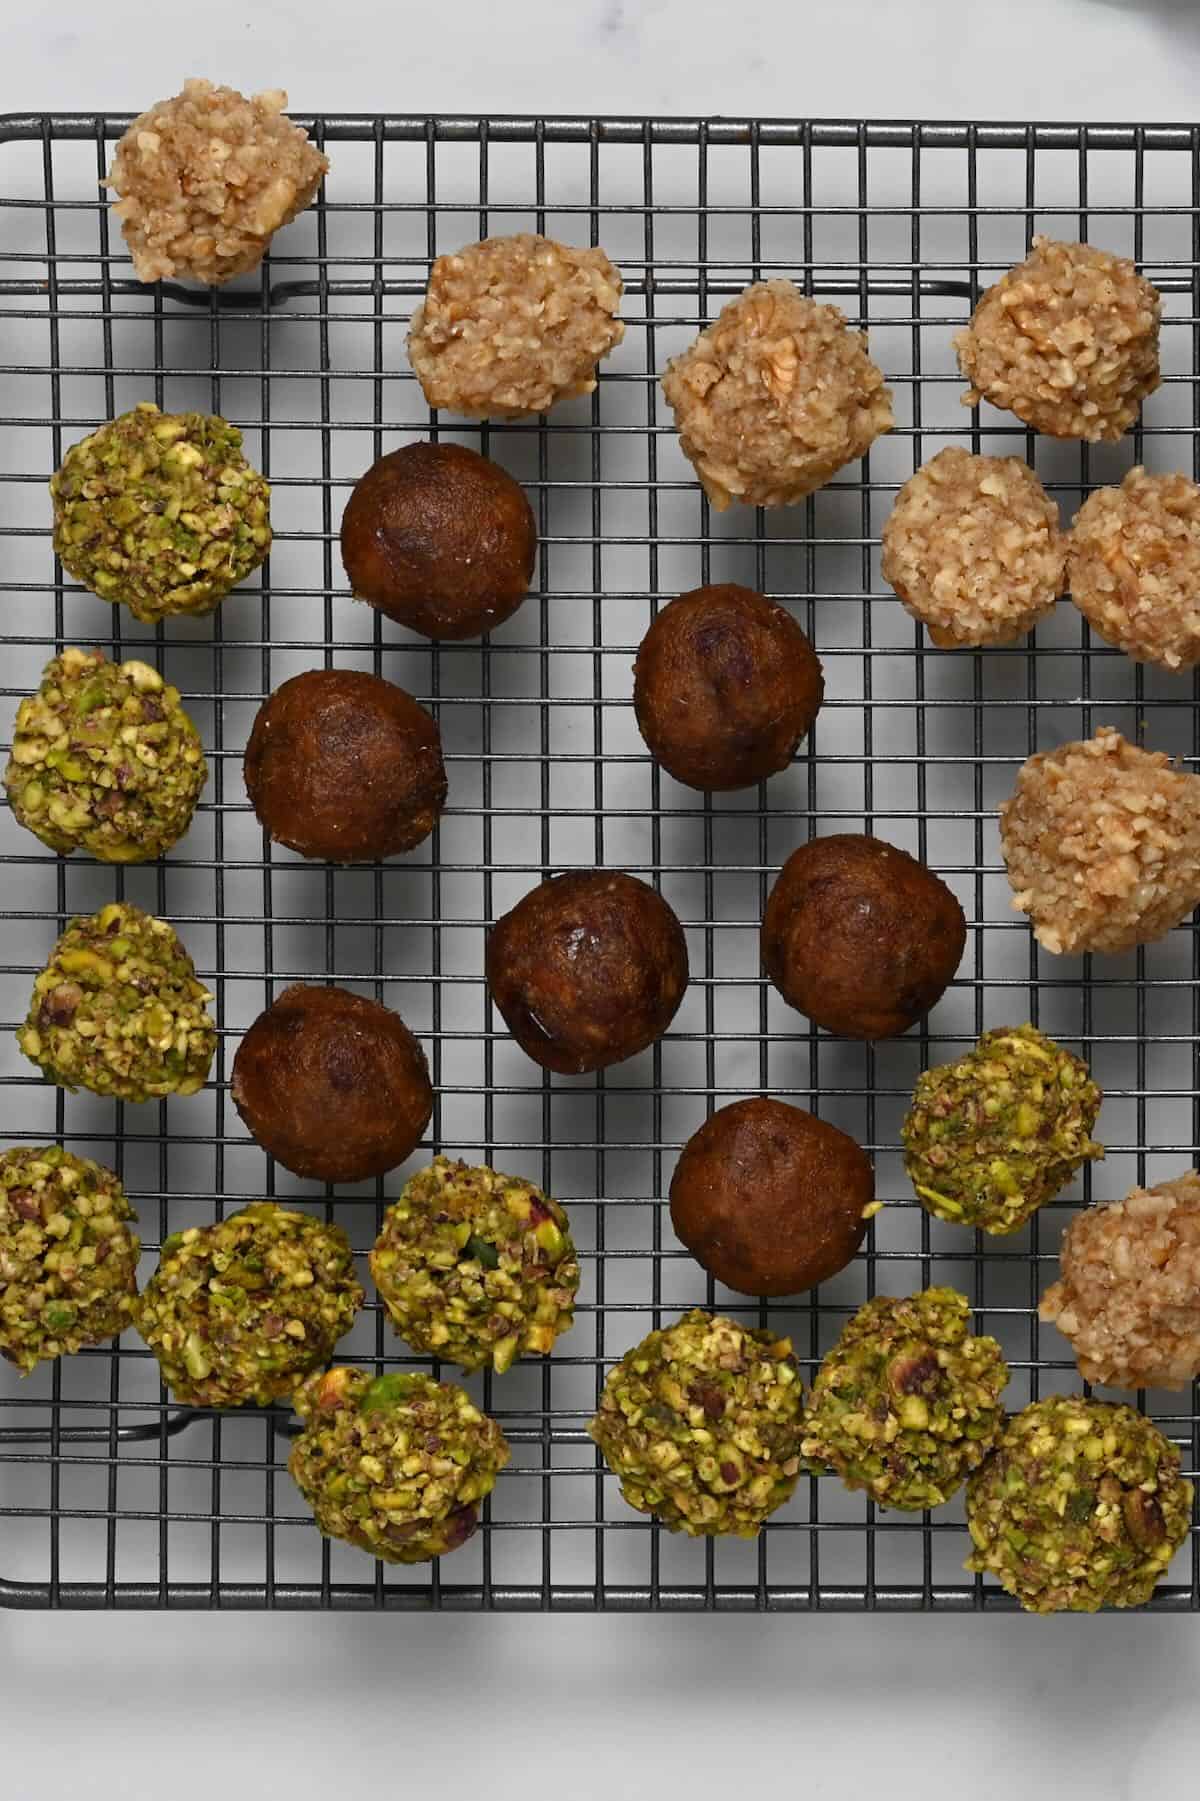 Cookie filling with dates and nuts shaped into balls